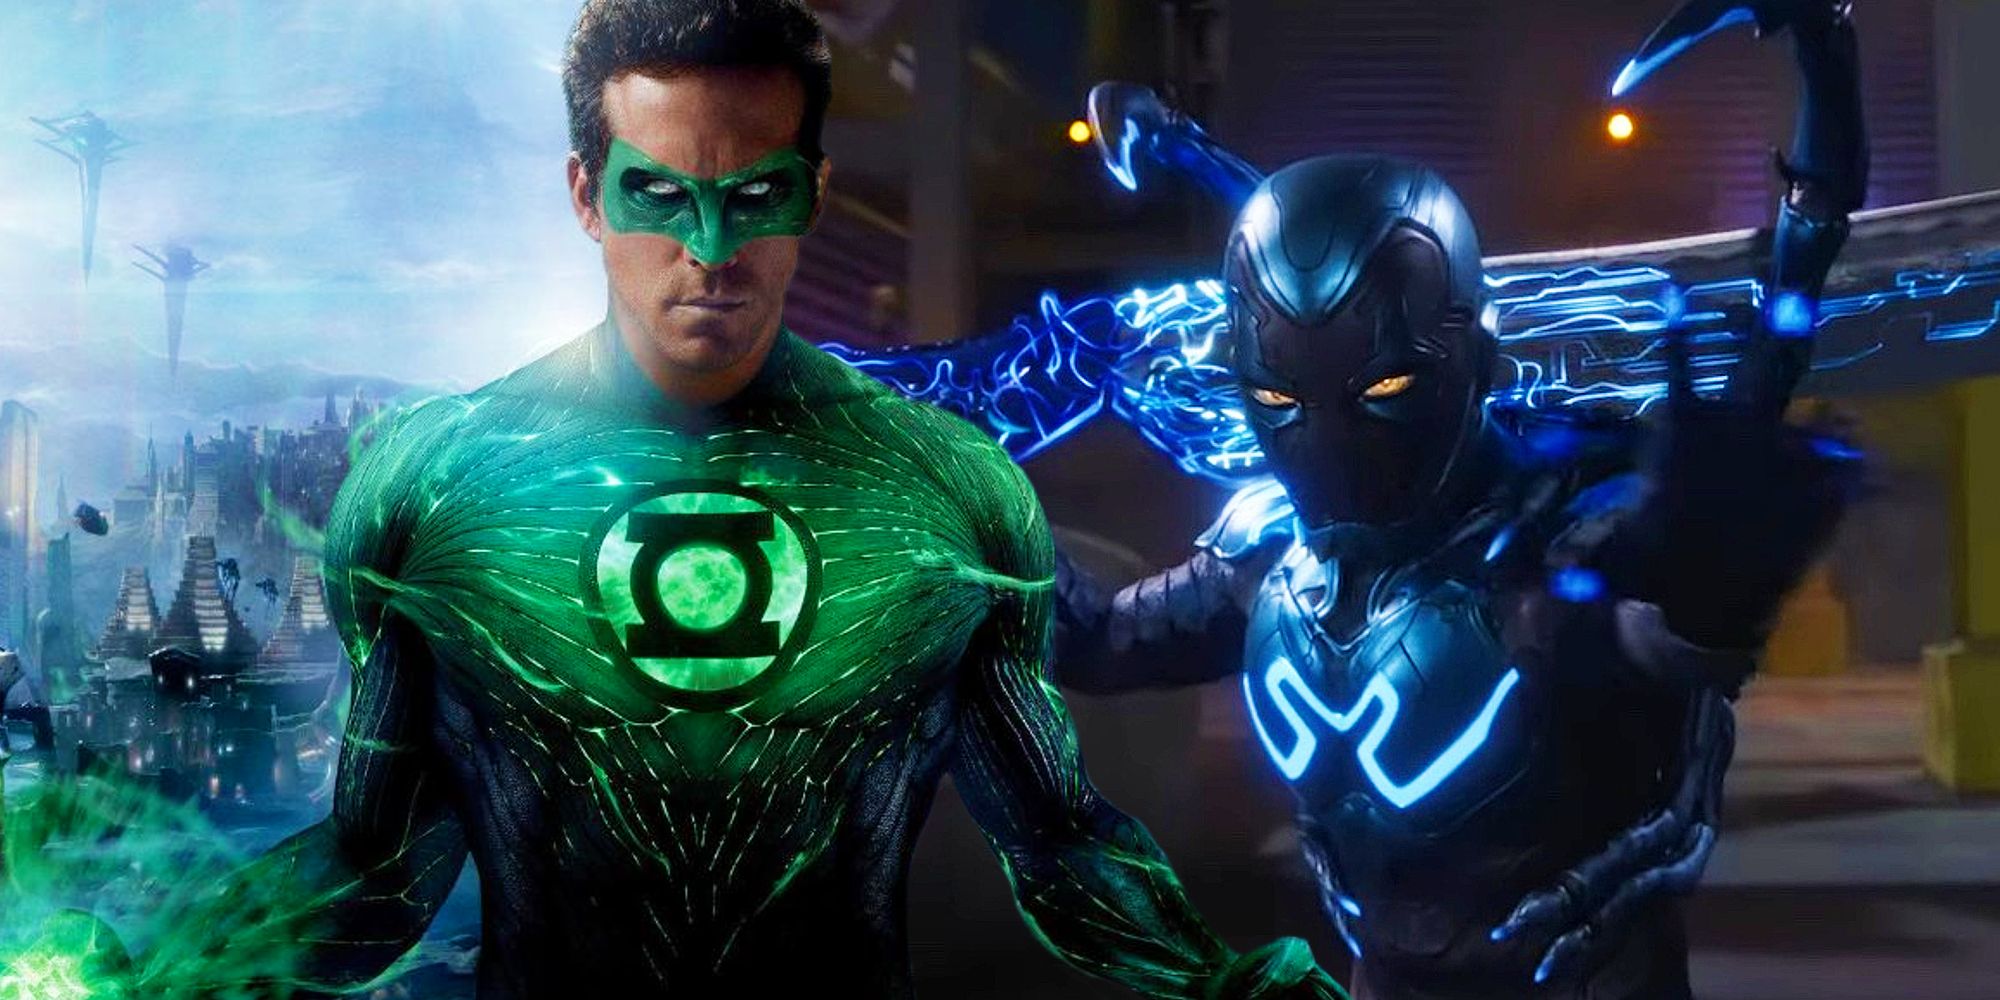 DC's Blue Beetle Movie Sets 2023 Theatrical Release Date